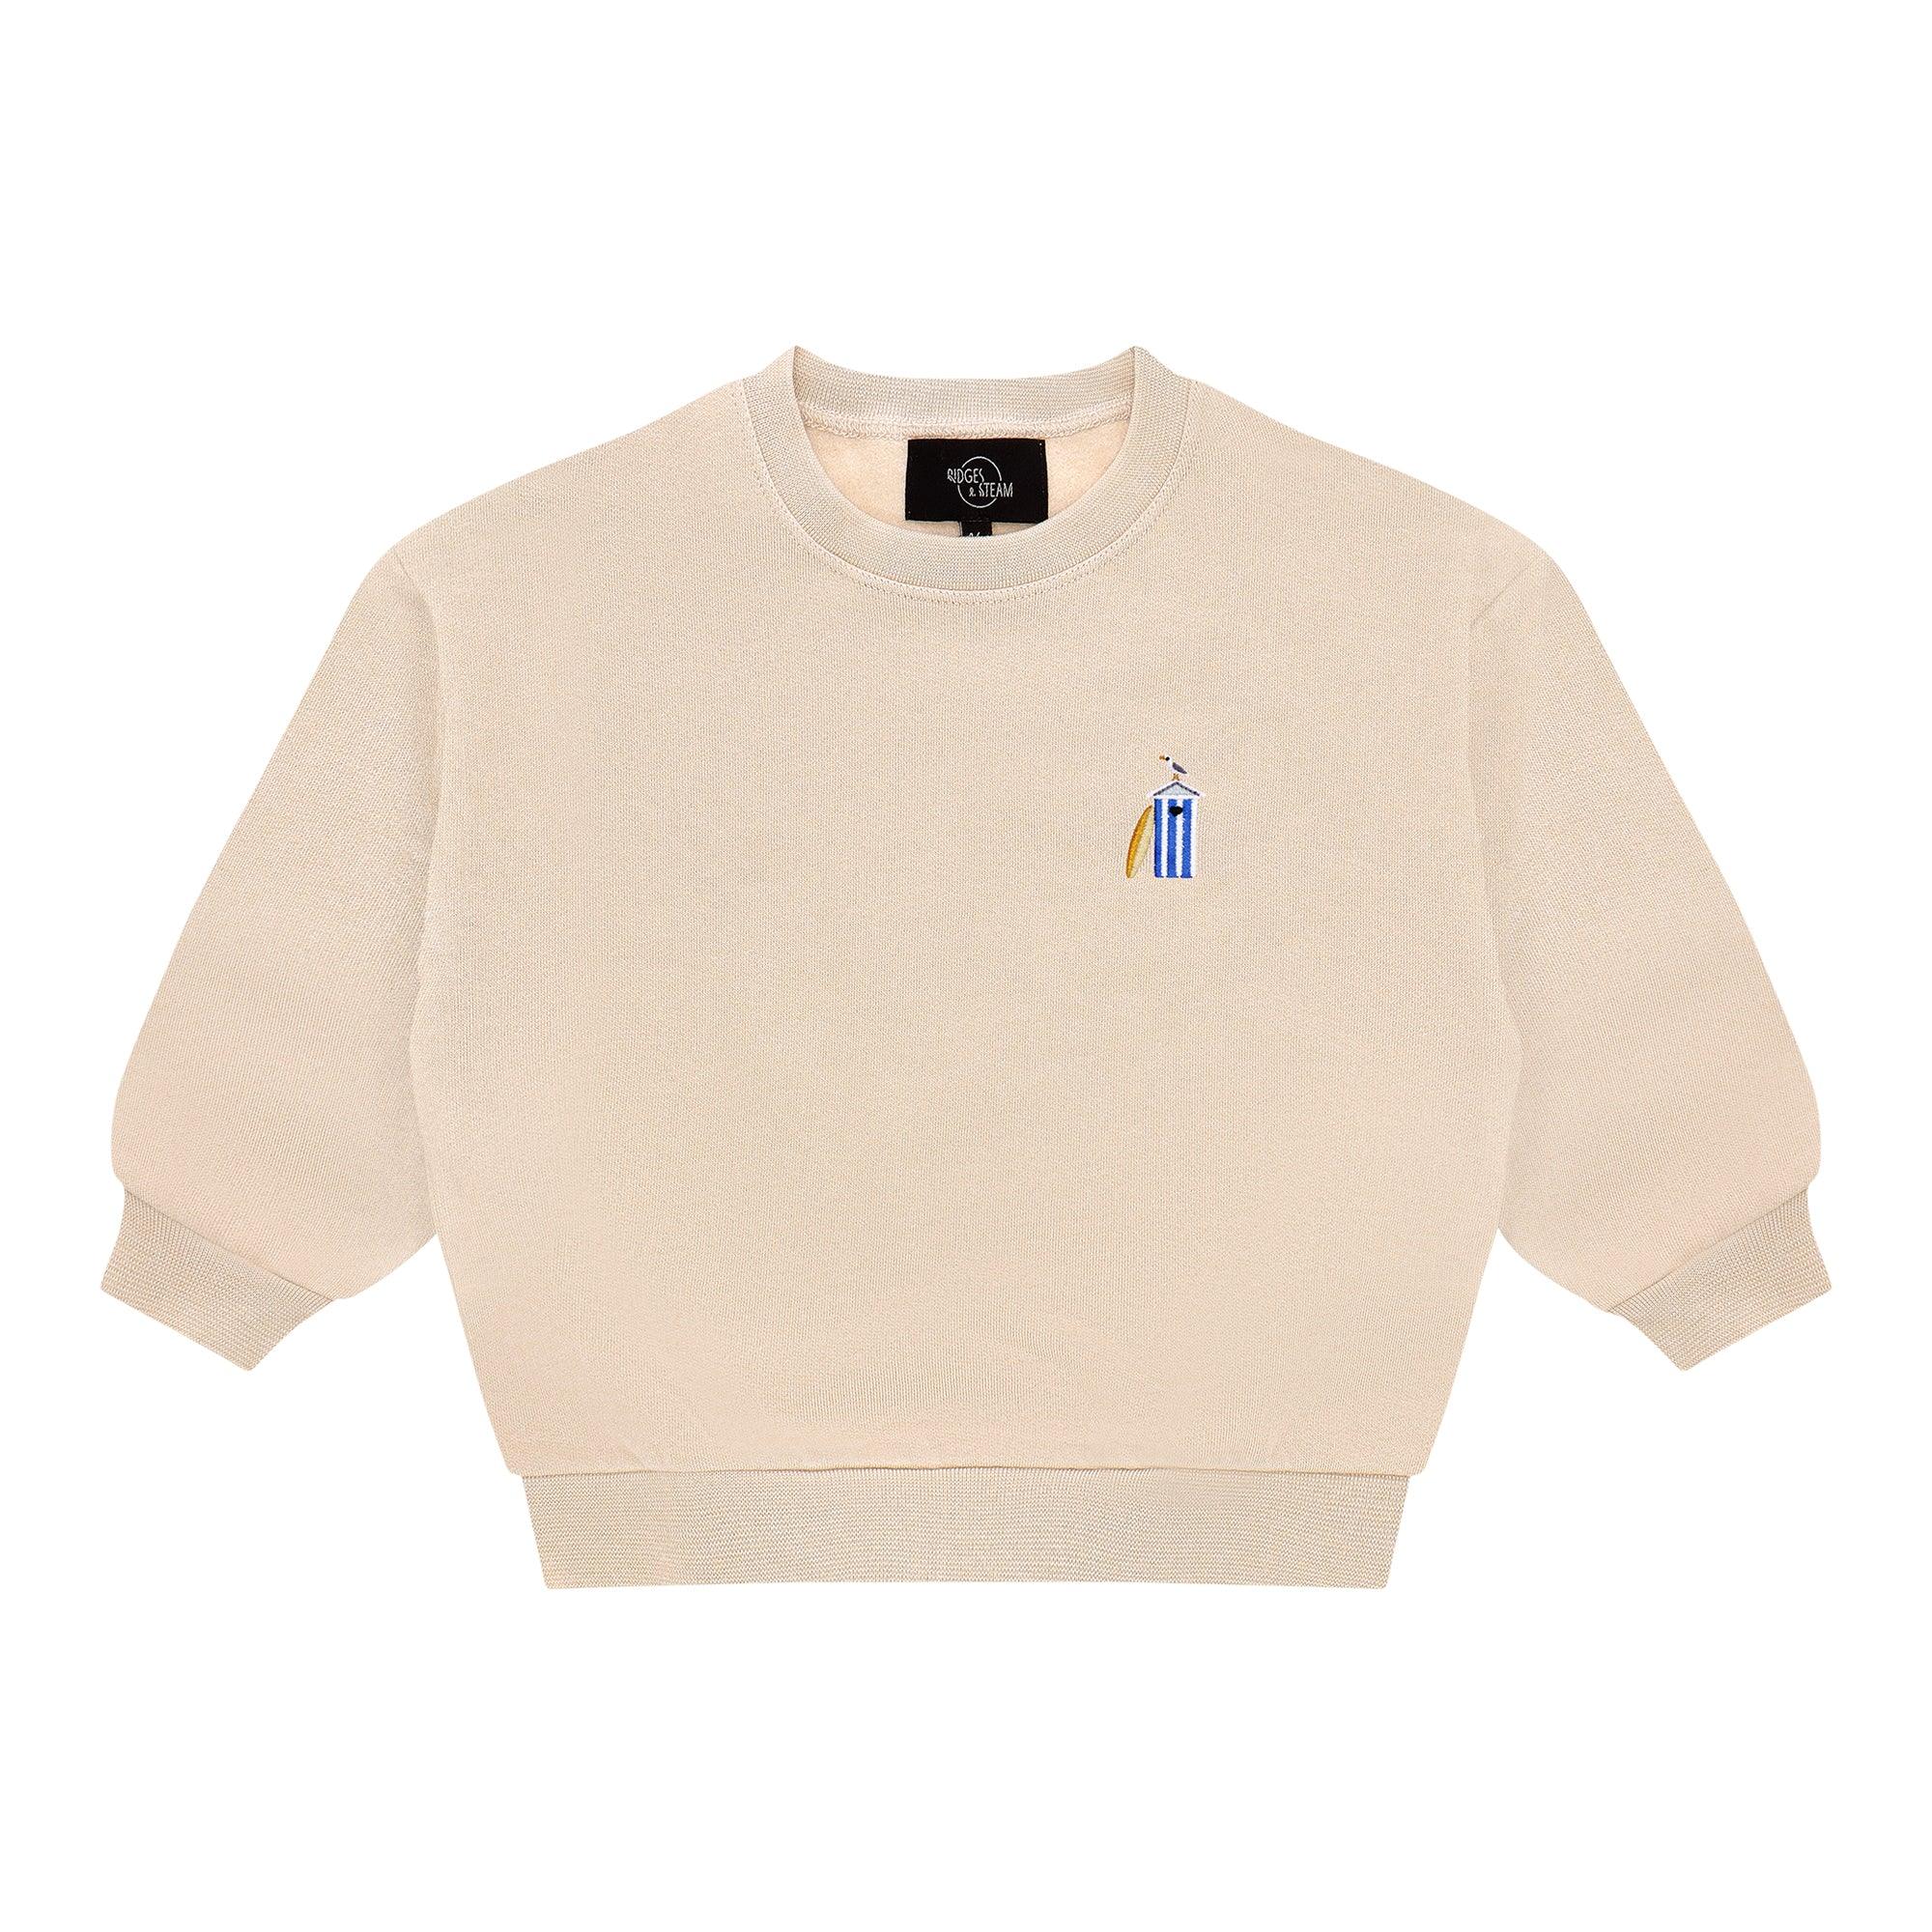 Baby/kids 'Take me to the sea' sweater - beach house - beige - Ridges And Steam